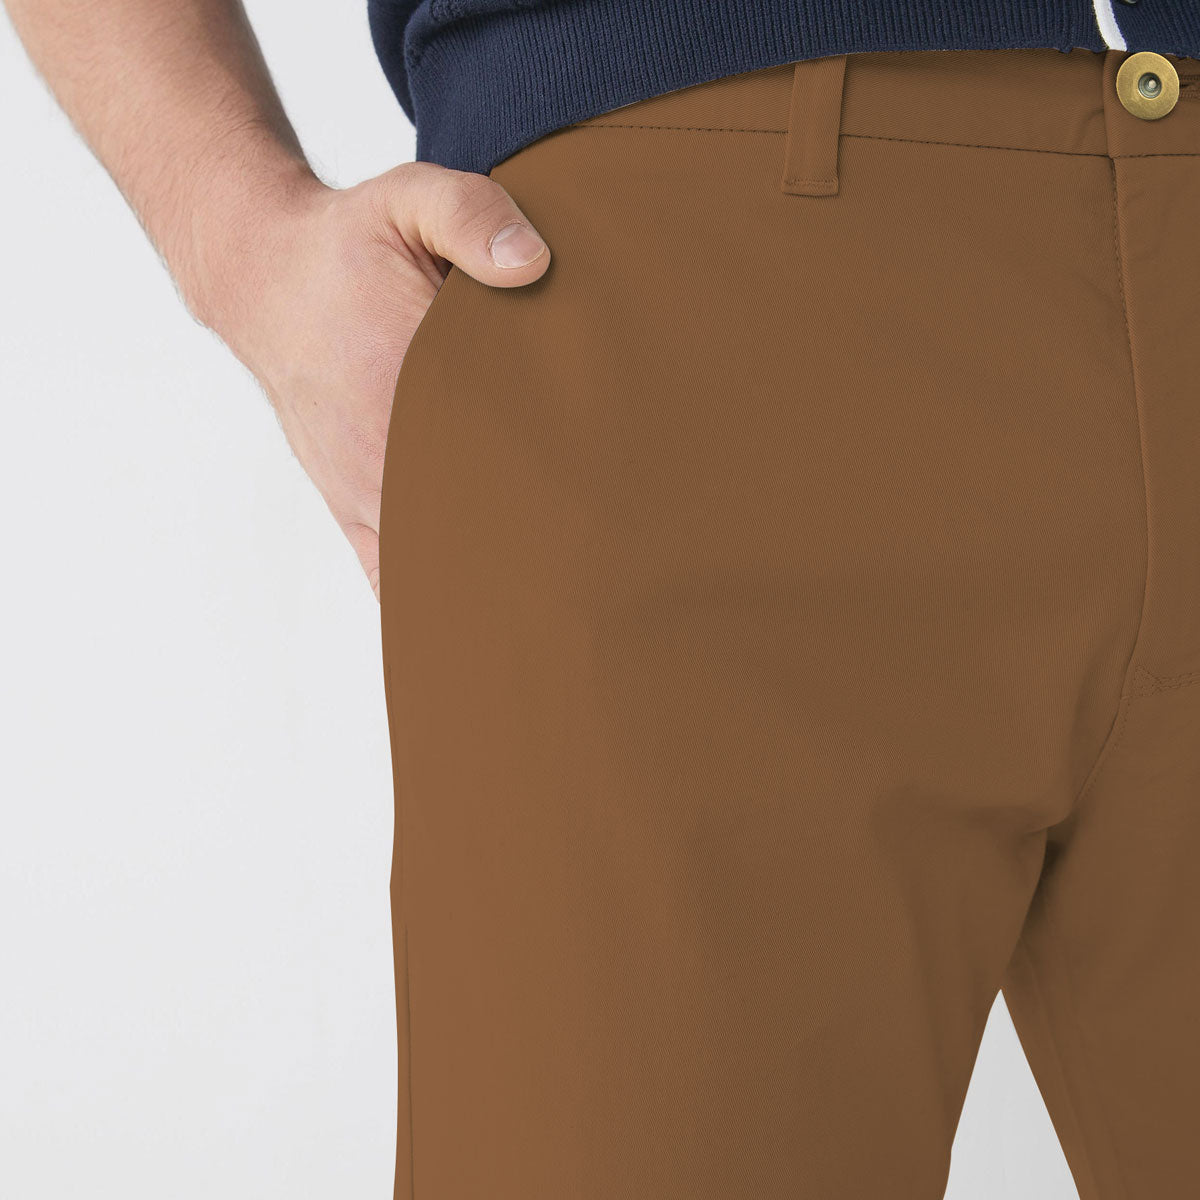 BRANDED BROWN NARROW COTTON PANT